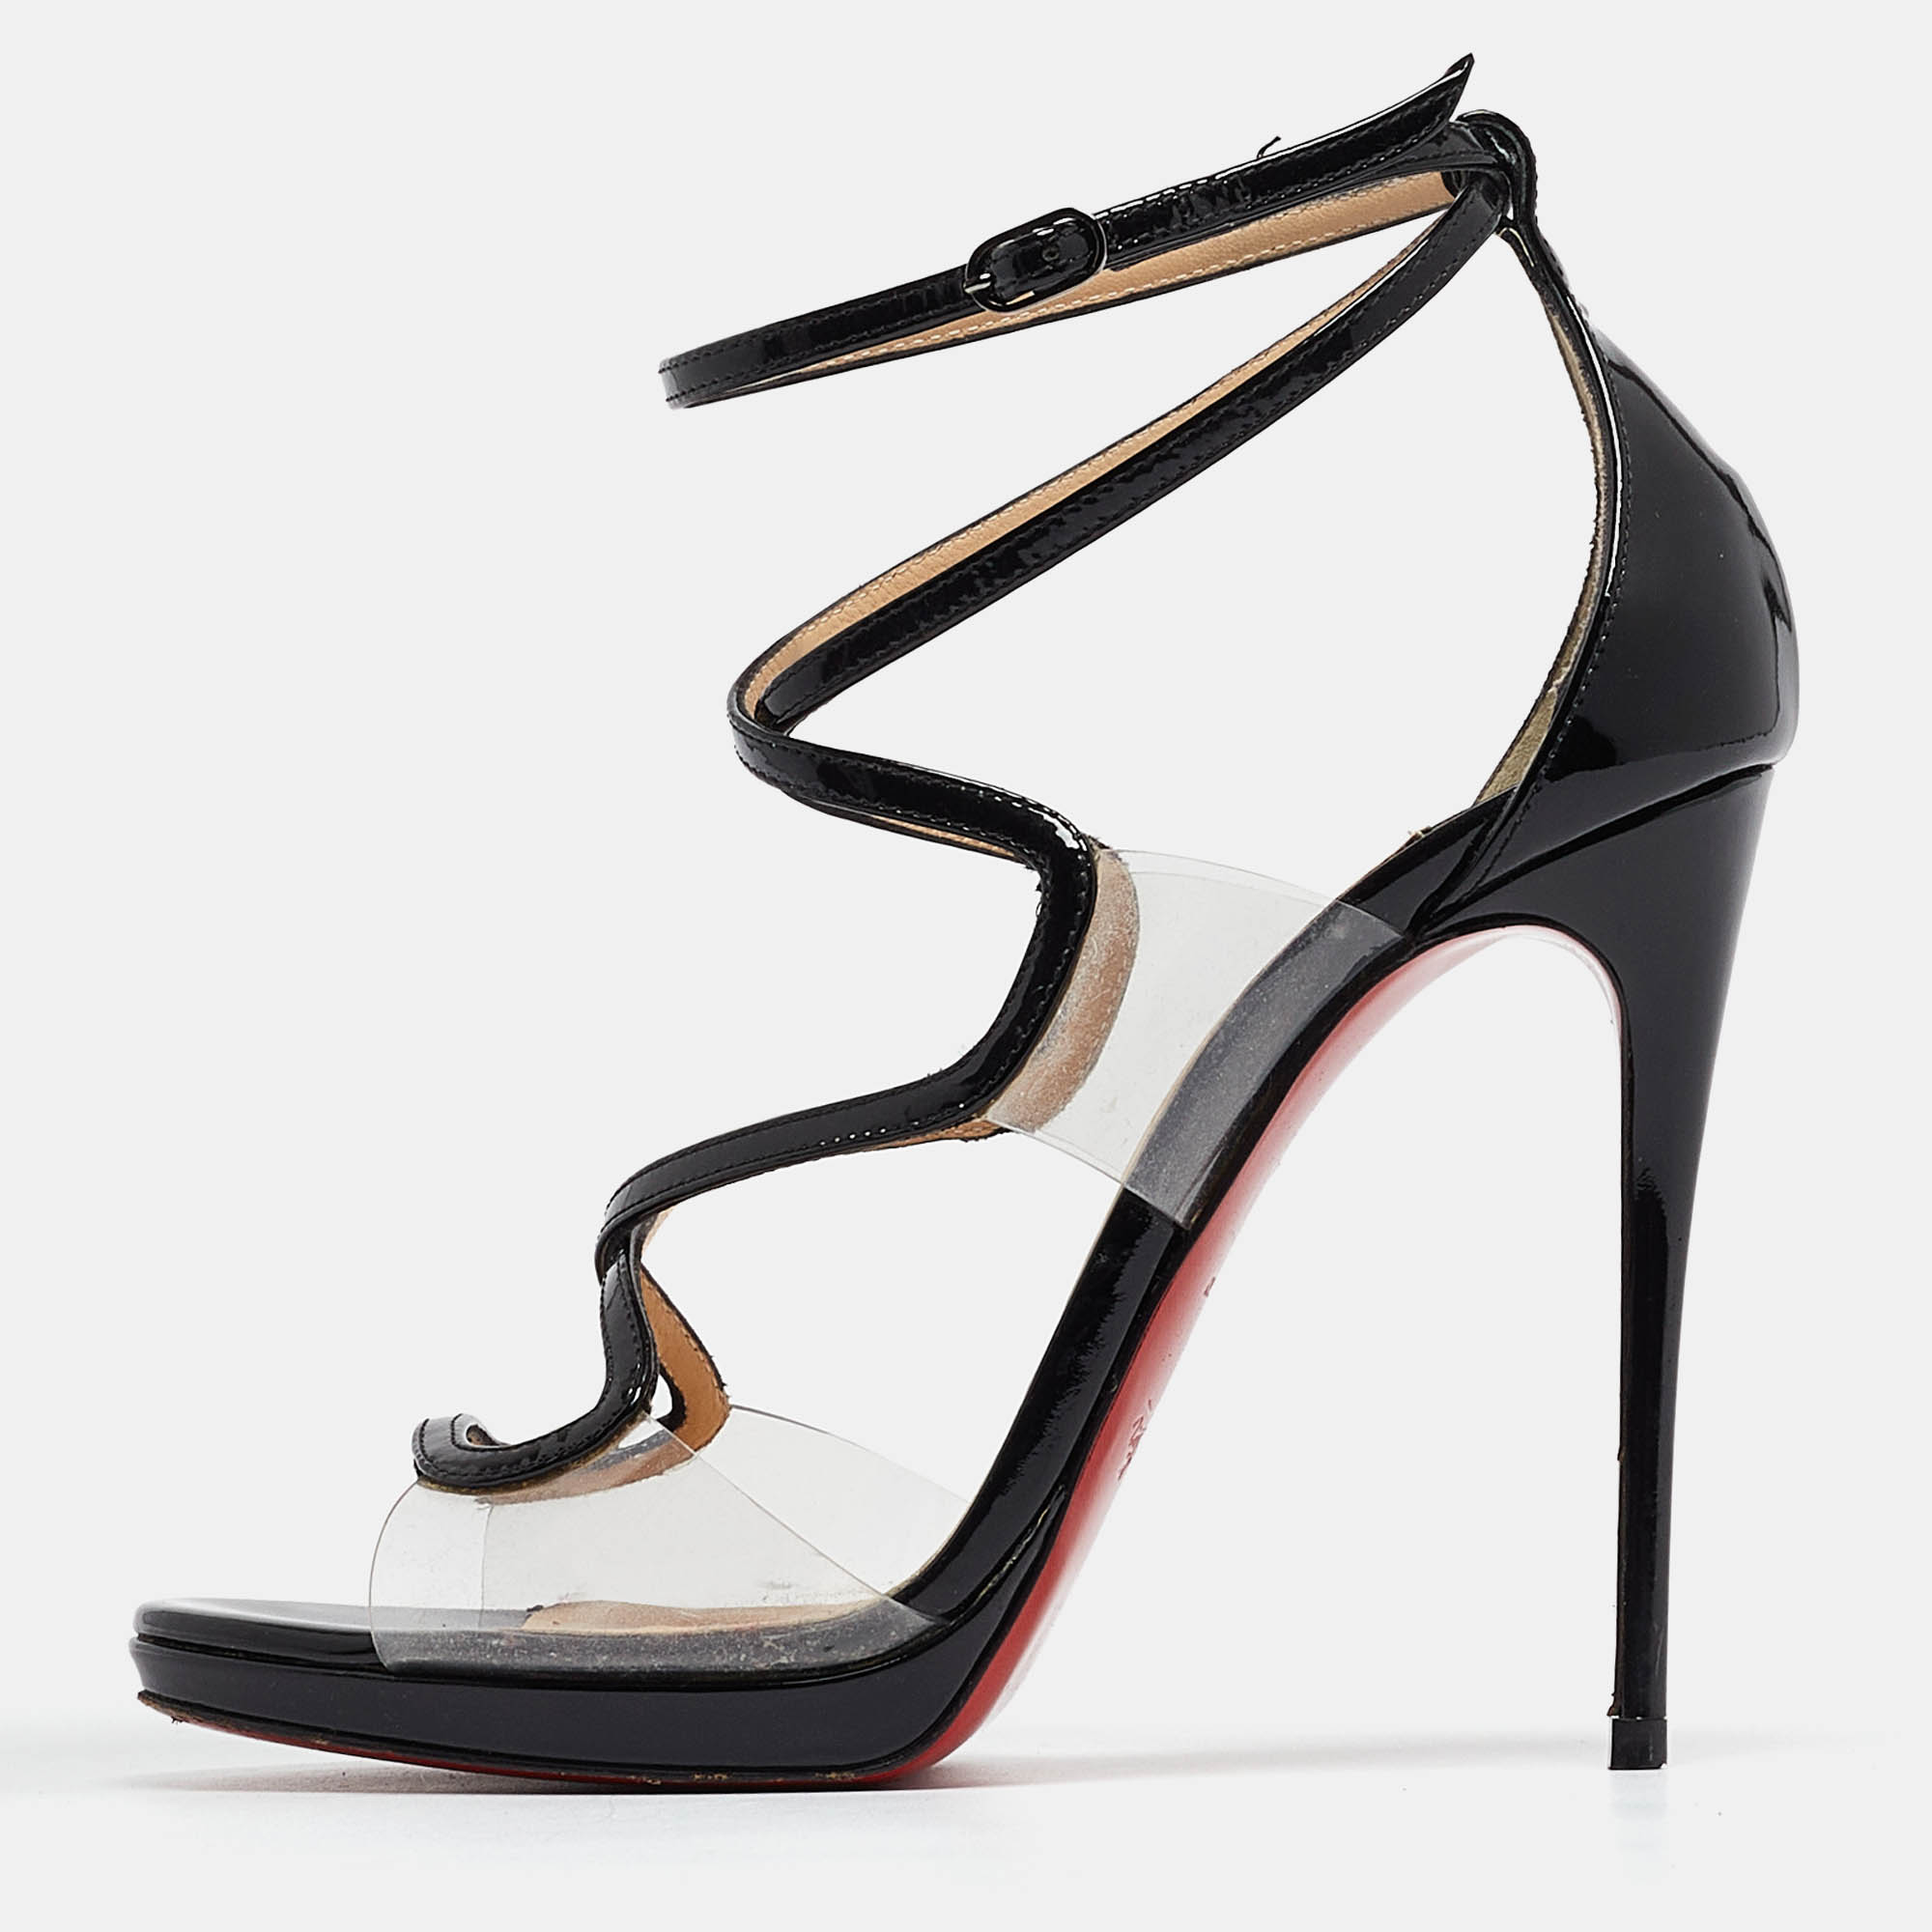 Christian louboutin black patent and pvc strappy sandals size 35